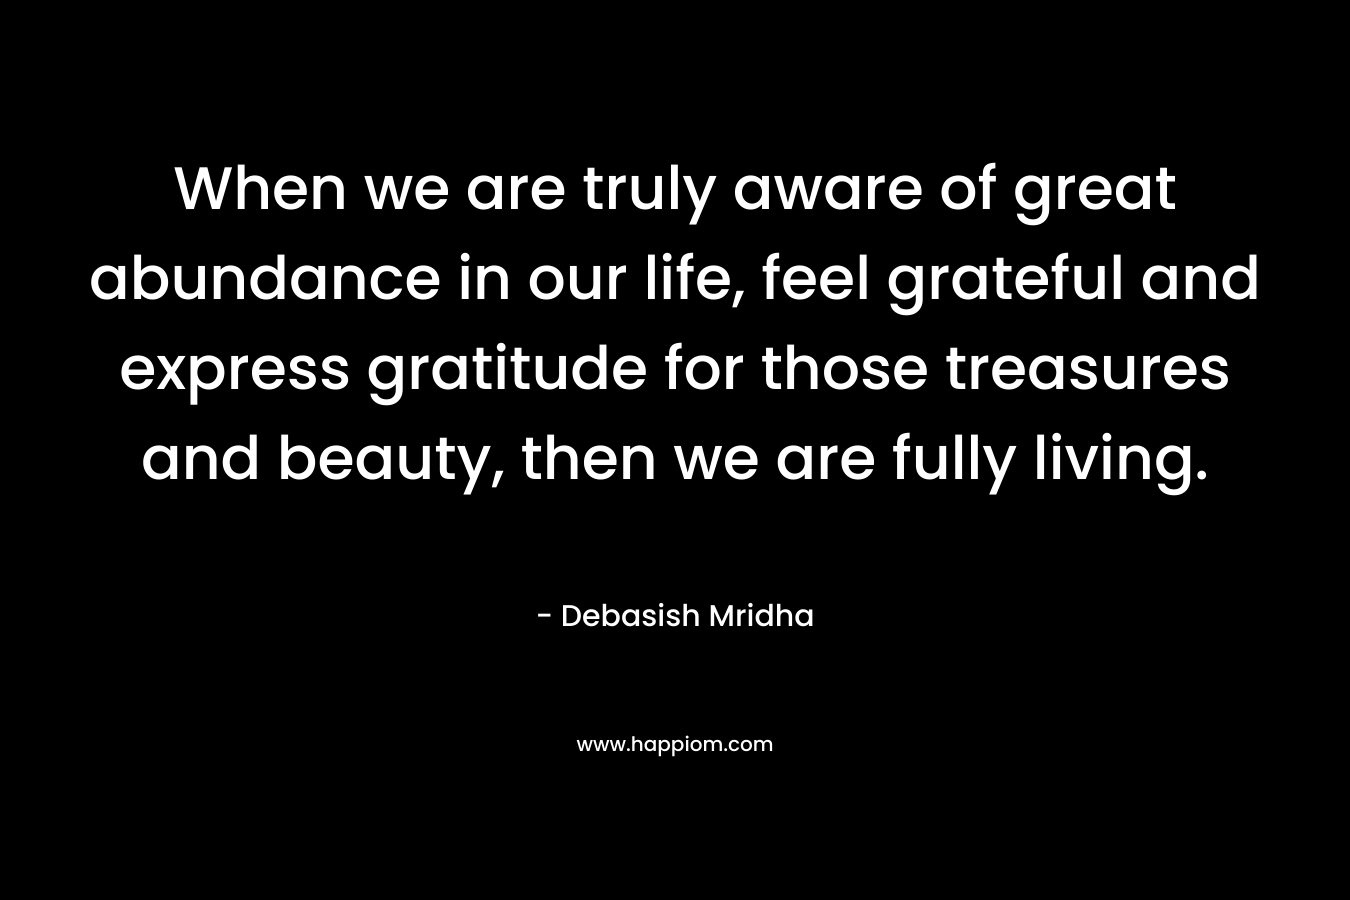 When we are truly aware of great abundance in our life, feel grateful and express gratitude for those treasures and beauty, then we are fully living.